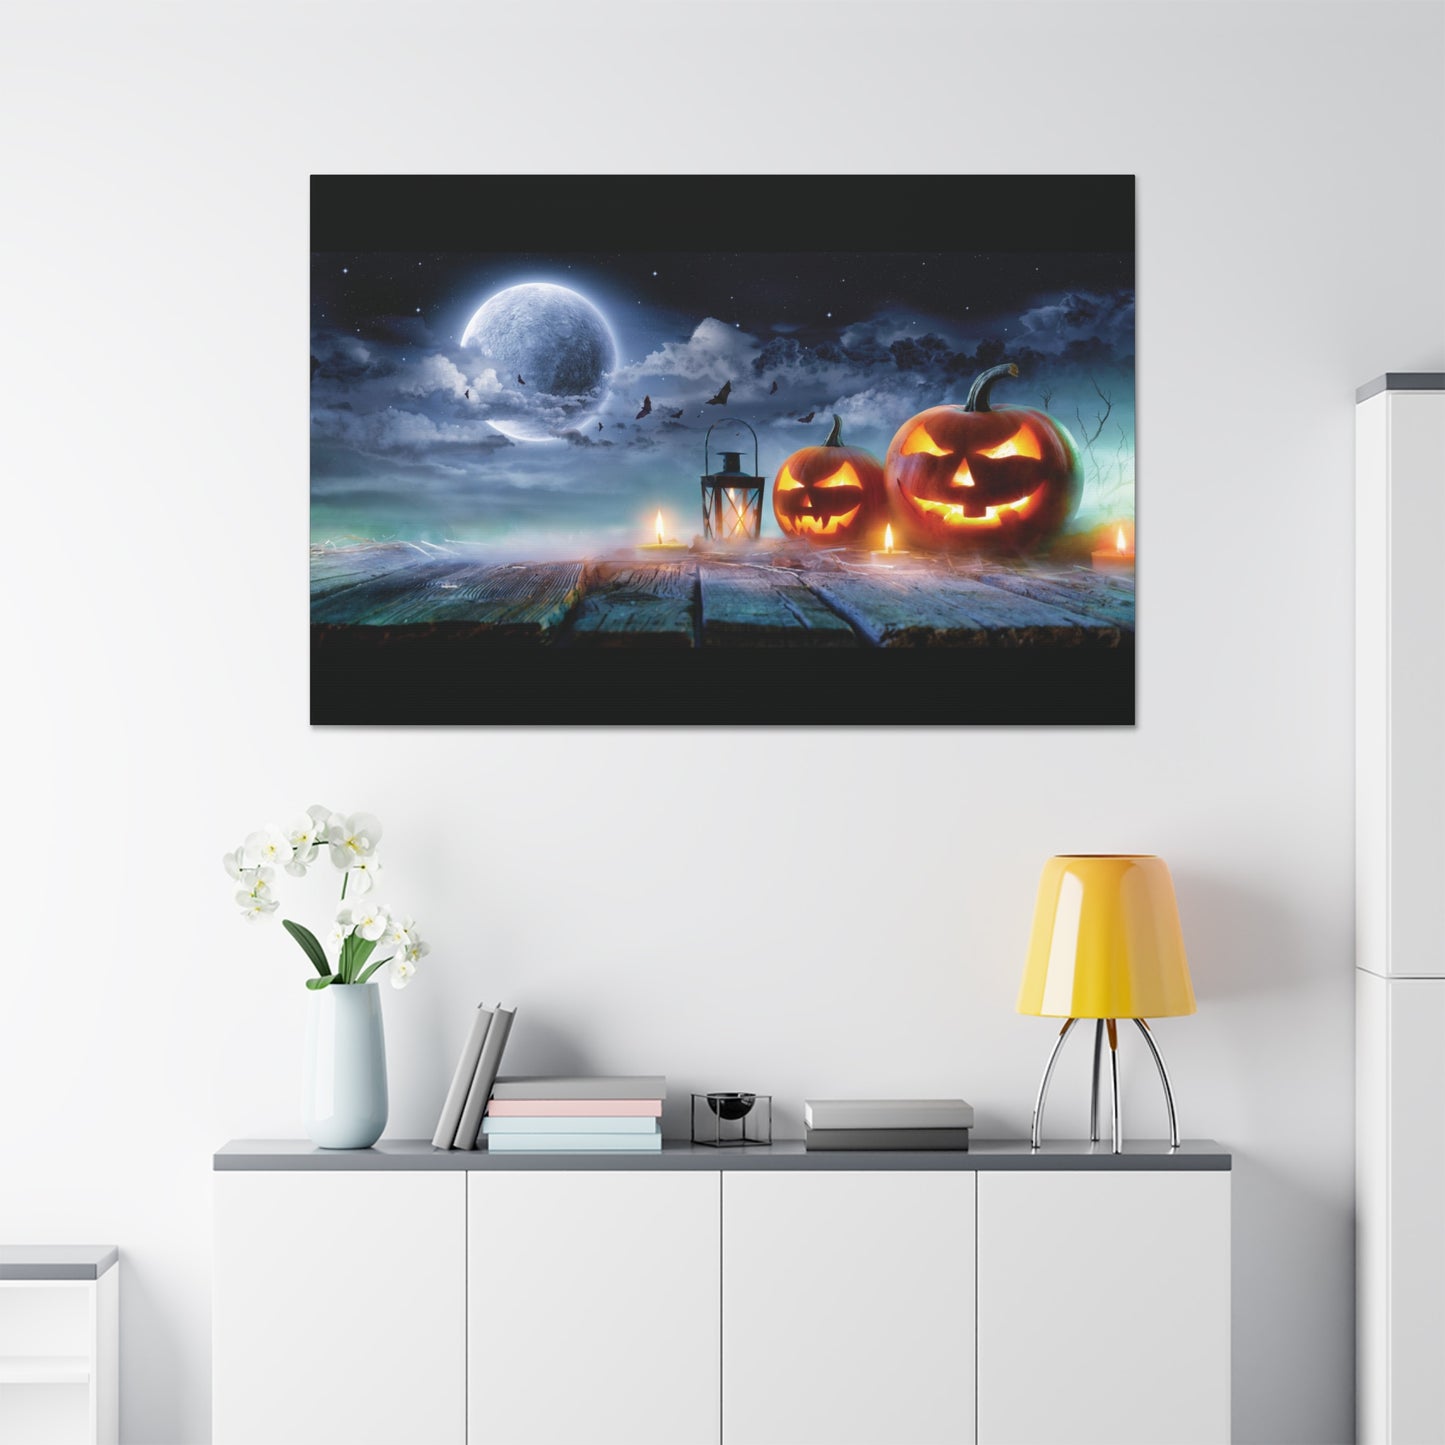 Halloween Canvas Stretched, 1.5''